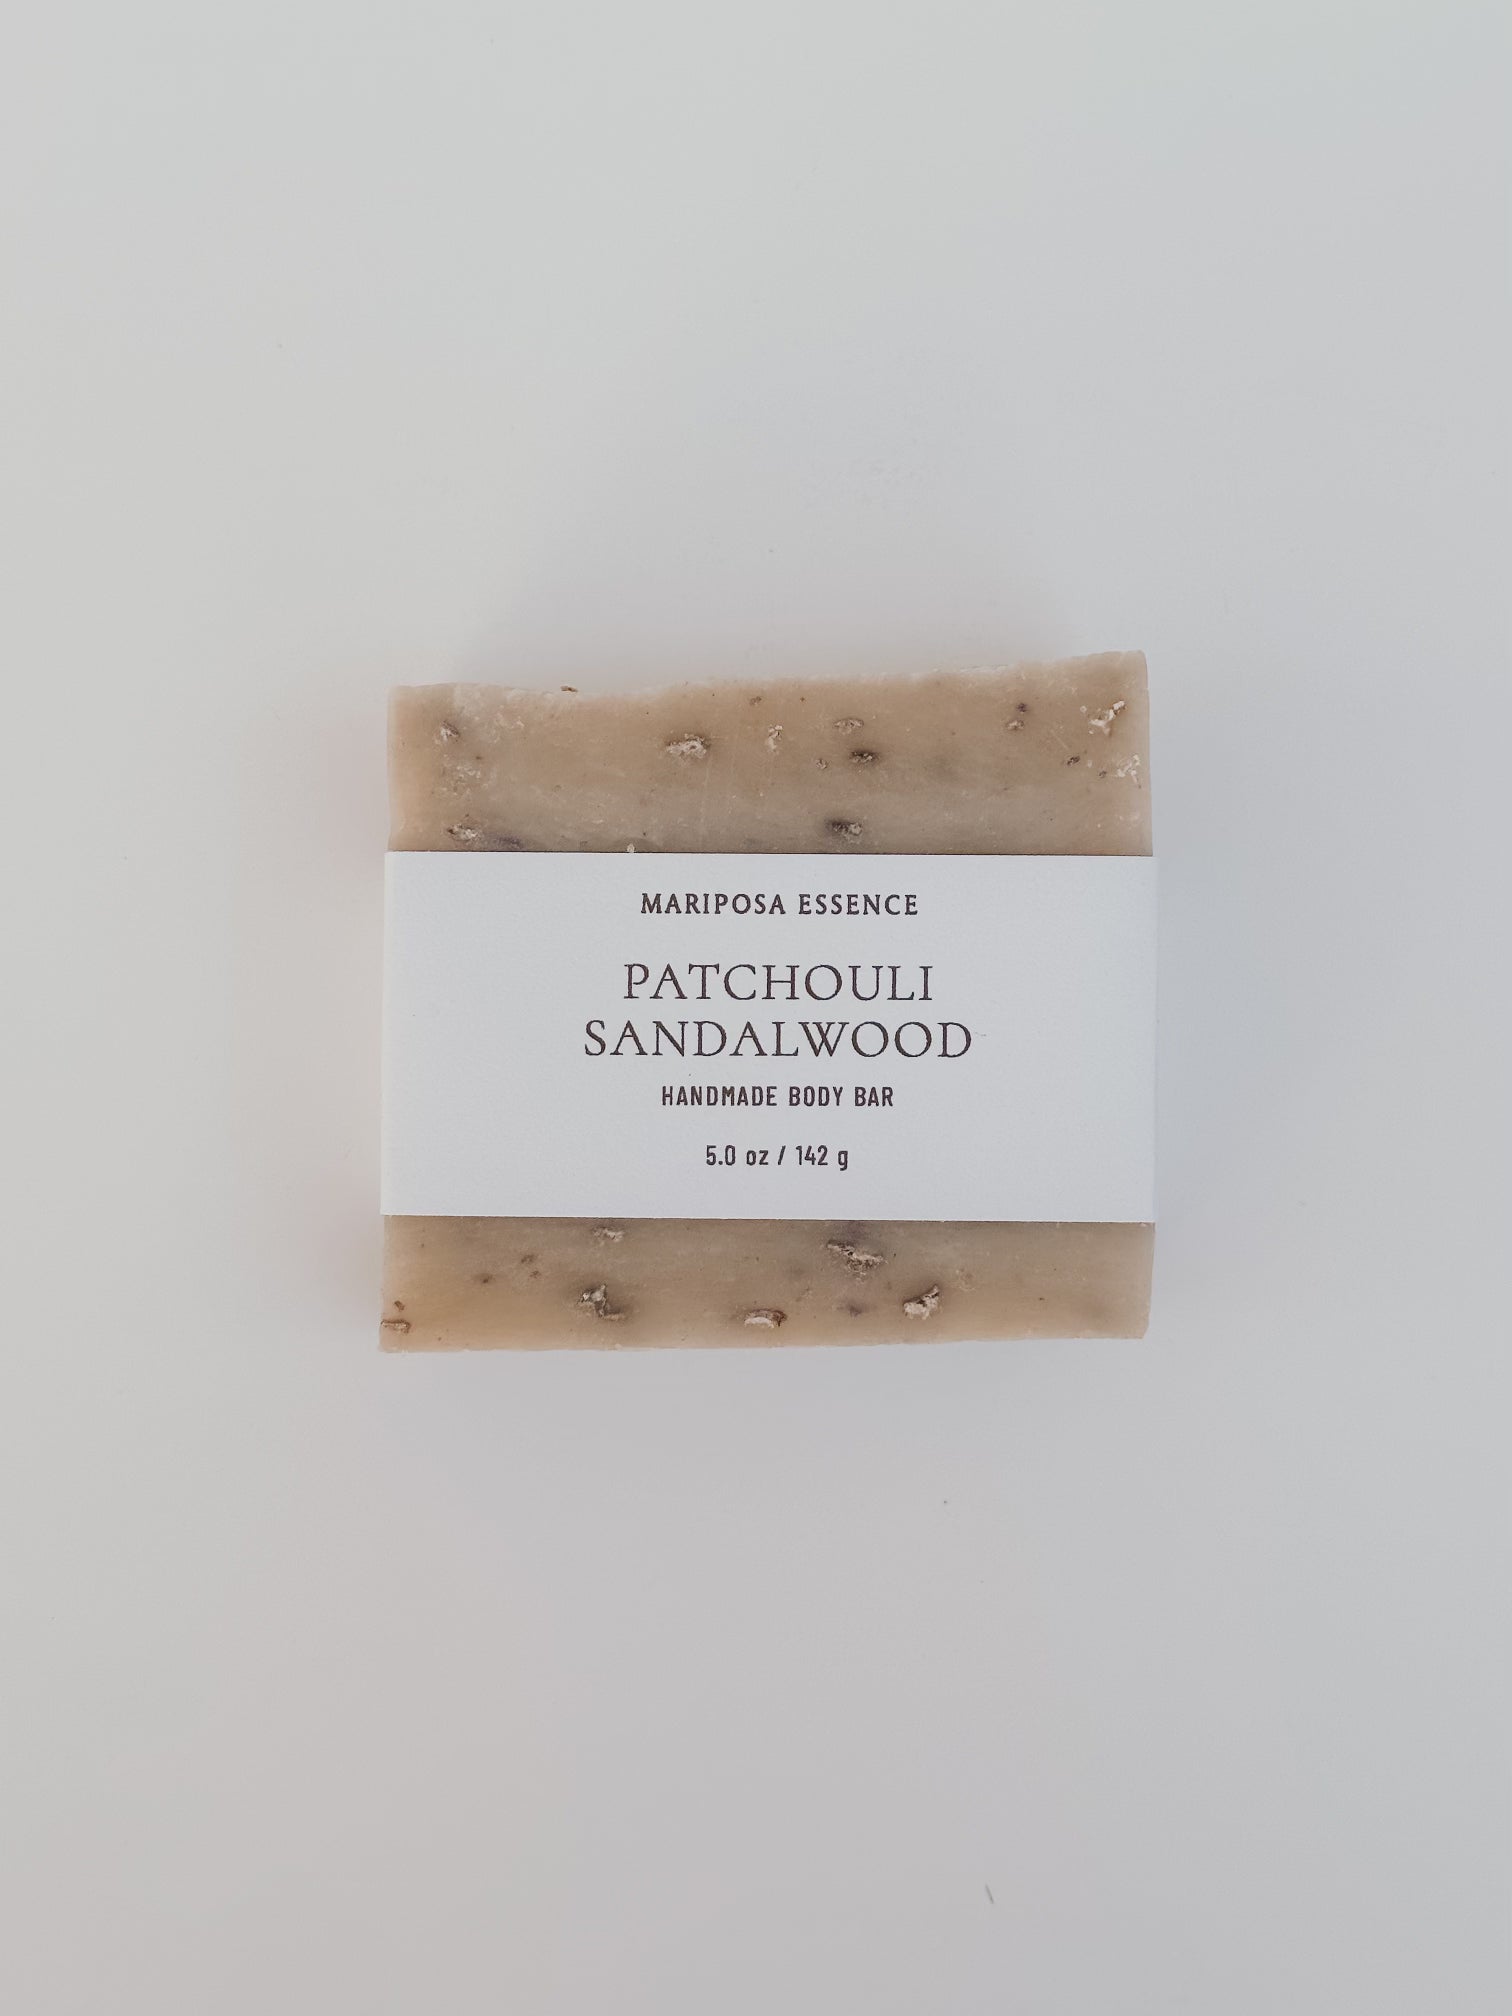 Patchouli Sandalwood displayed with a simple wrapper